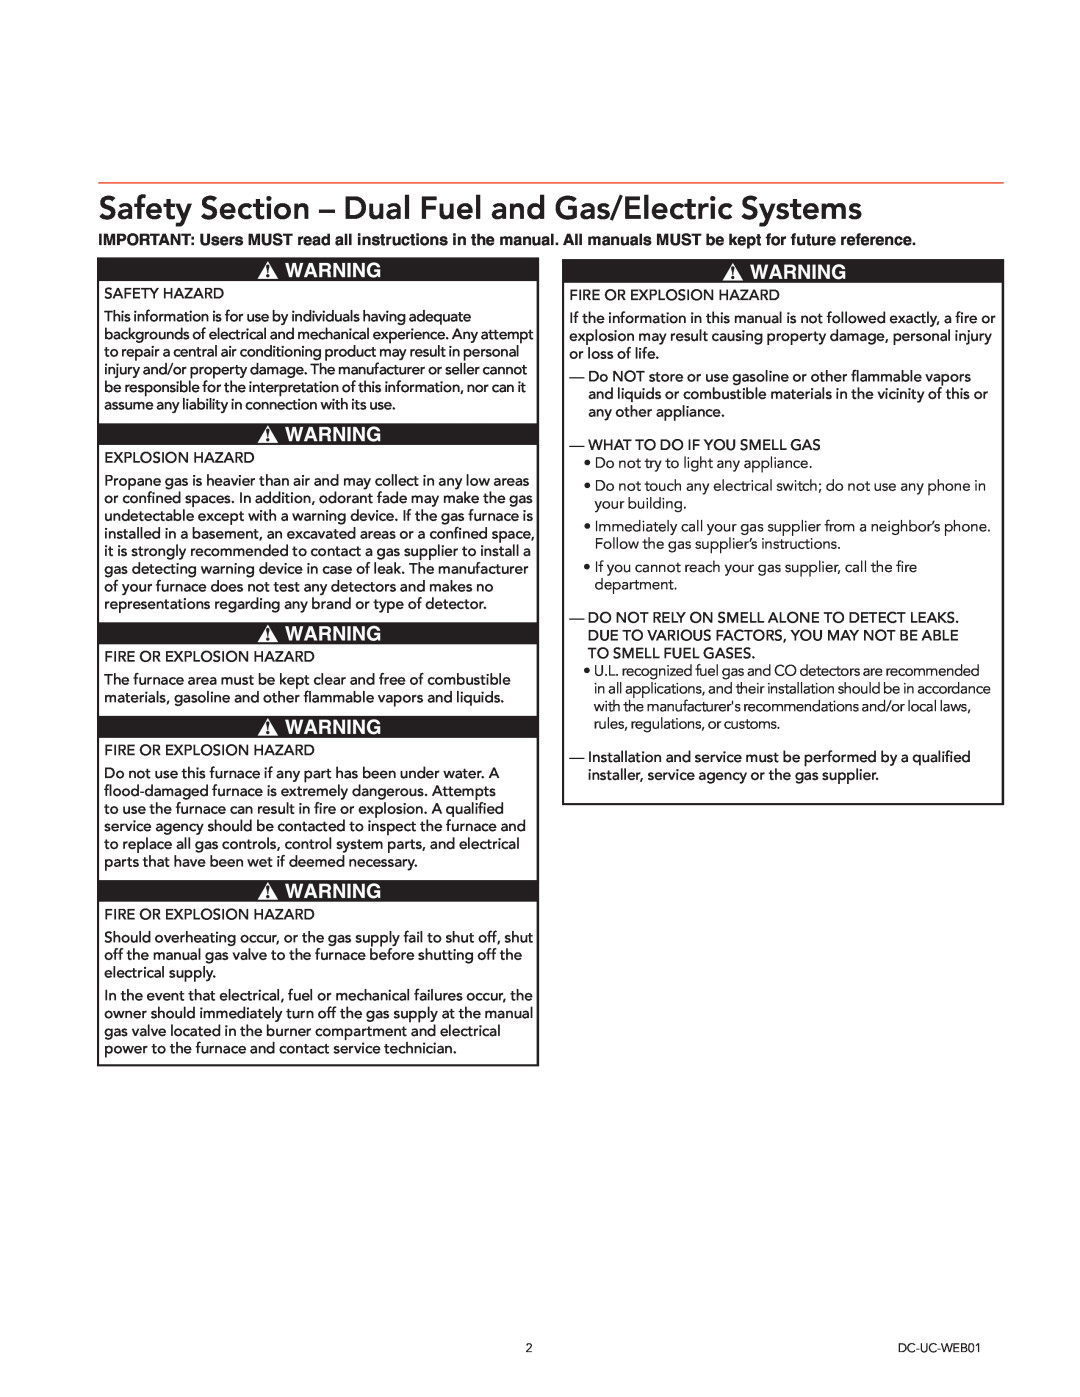 Trane DC-UC-WEB01, Packaged Systems or All-in-One manual Safety Hazard 